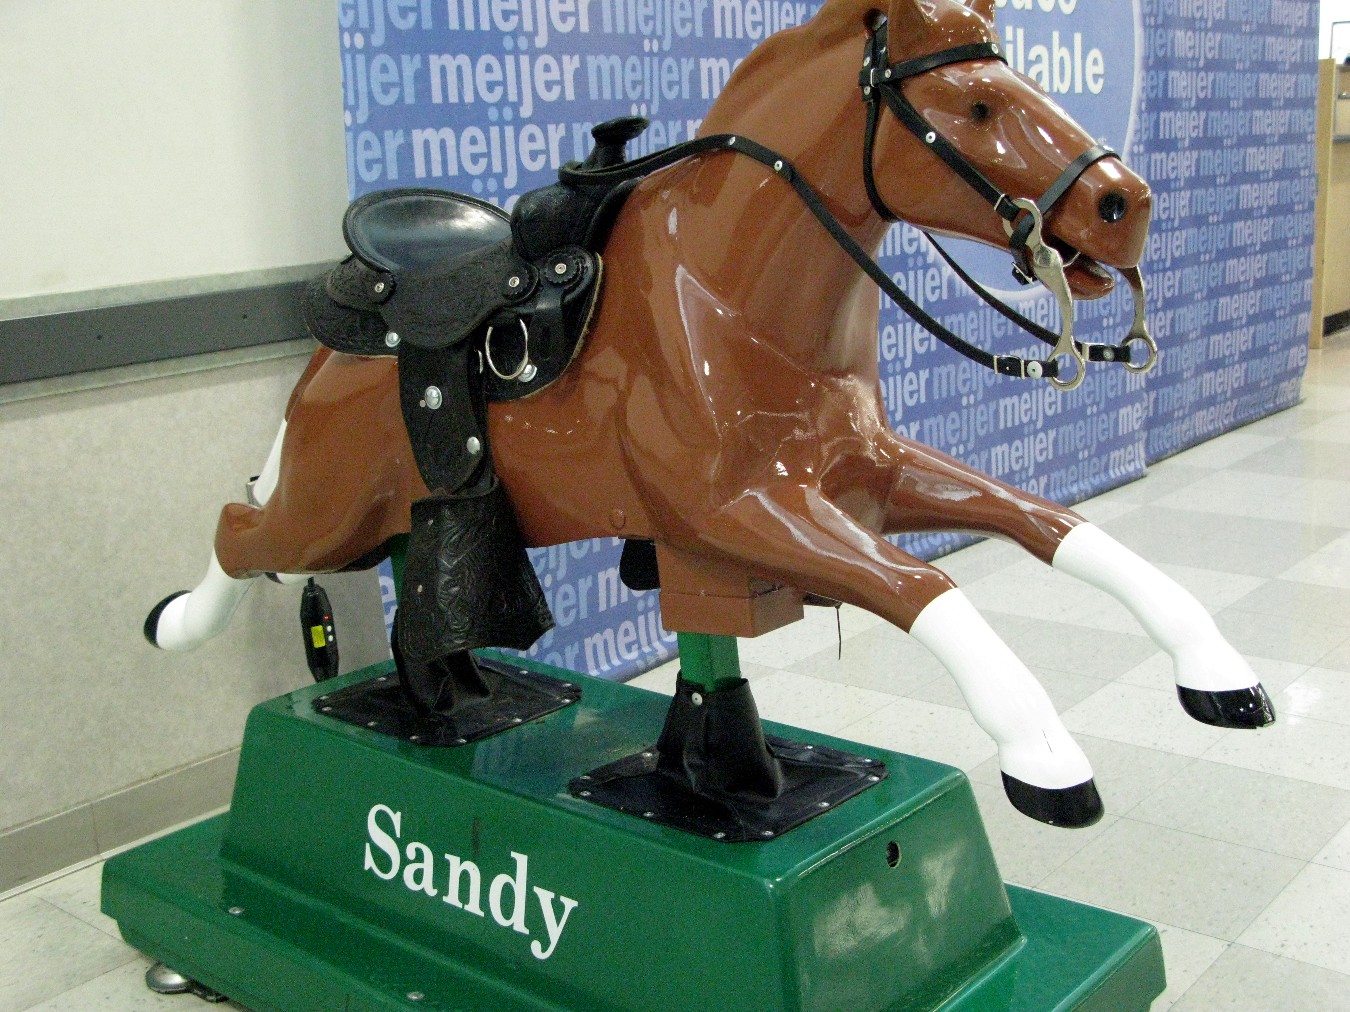 this horse is made of plastic and has a rider on its back